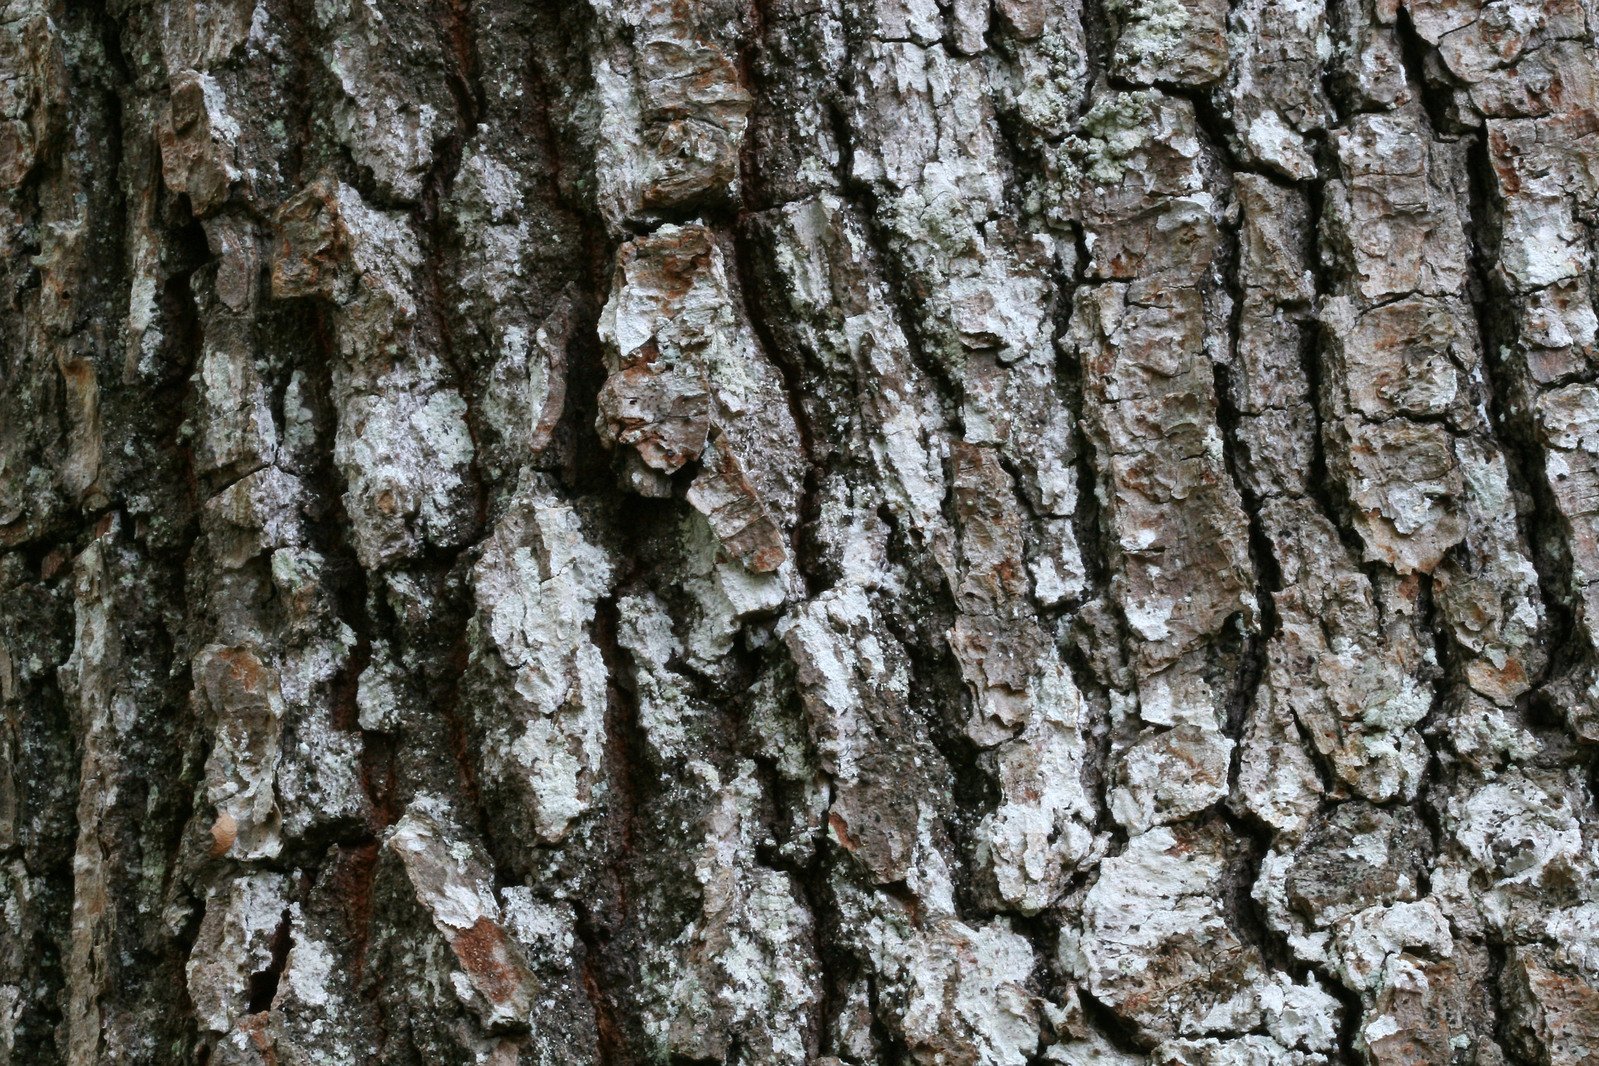 the bark of a large tree that is mostly white